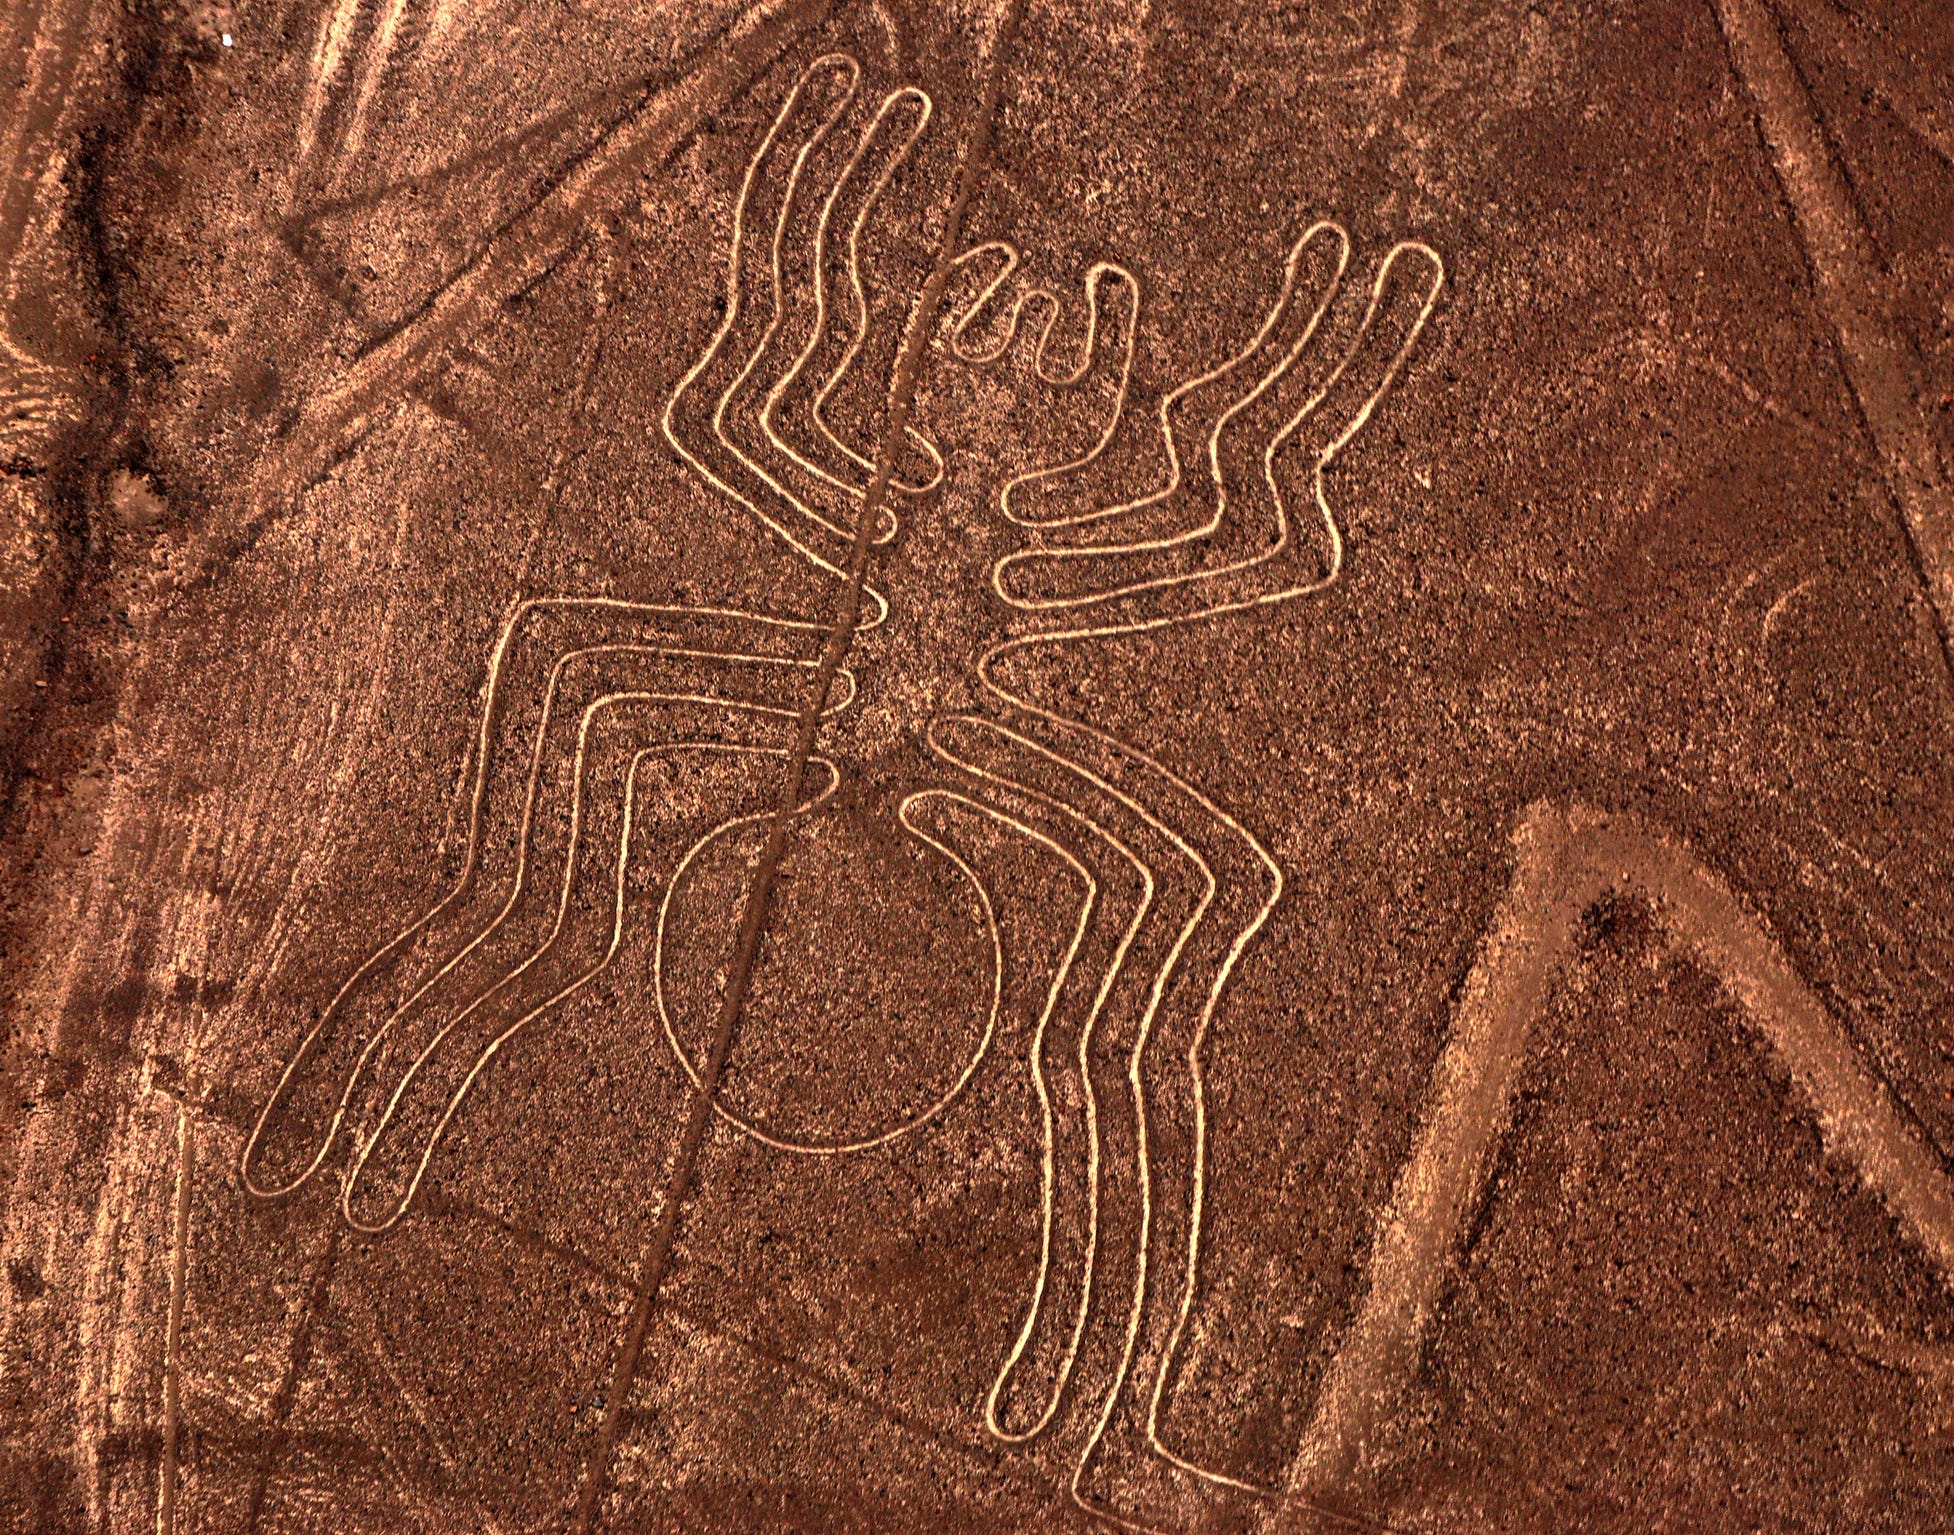 Researchers Just Uncovered Stunning Ancient Geoglyphs in the Desert